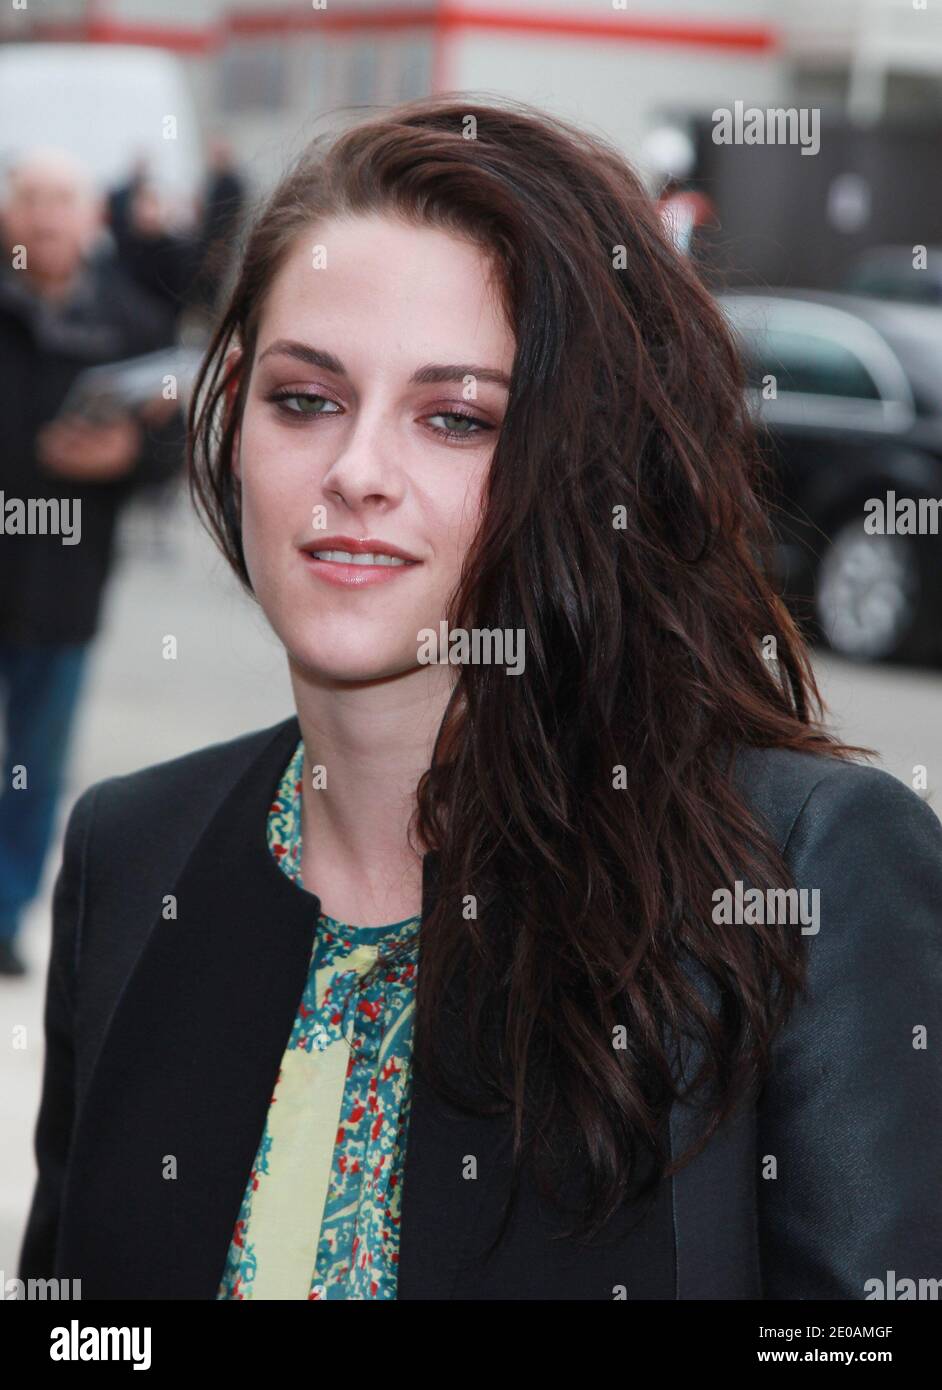 Kristen Stewart attends Balenciaga's Fall-Winter 2012-2013 Ready-To-Wear collection show held at Quai Javel in Paris, France, on March 1, 2012, as part of the Paris Fashion Week. Photo by Denis Guignebourg/ABACAPRESS.COM Stock Photo